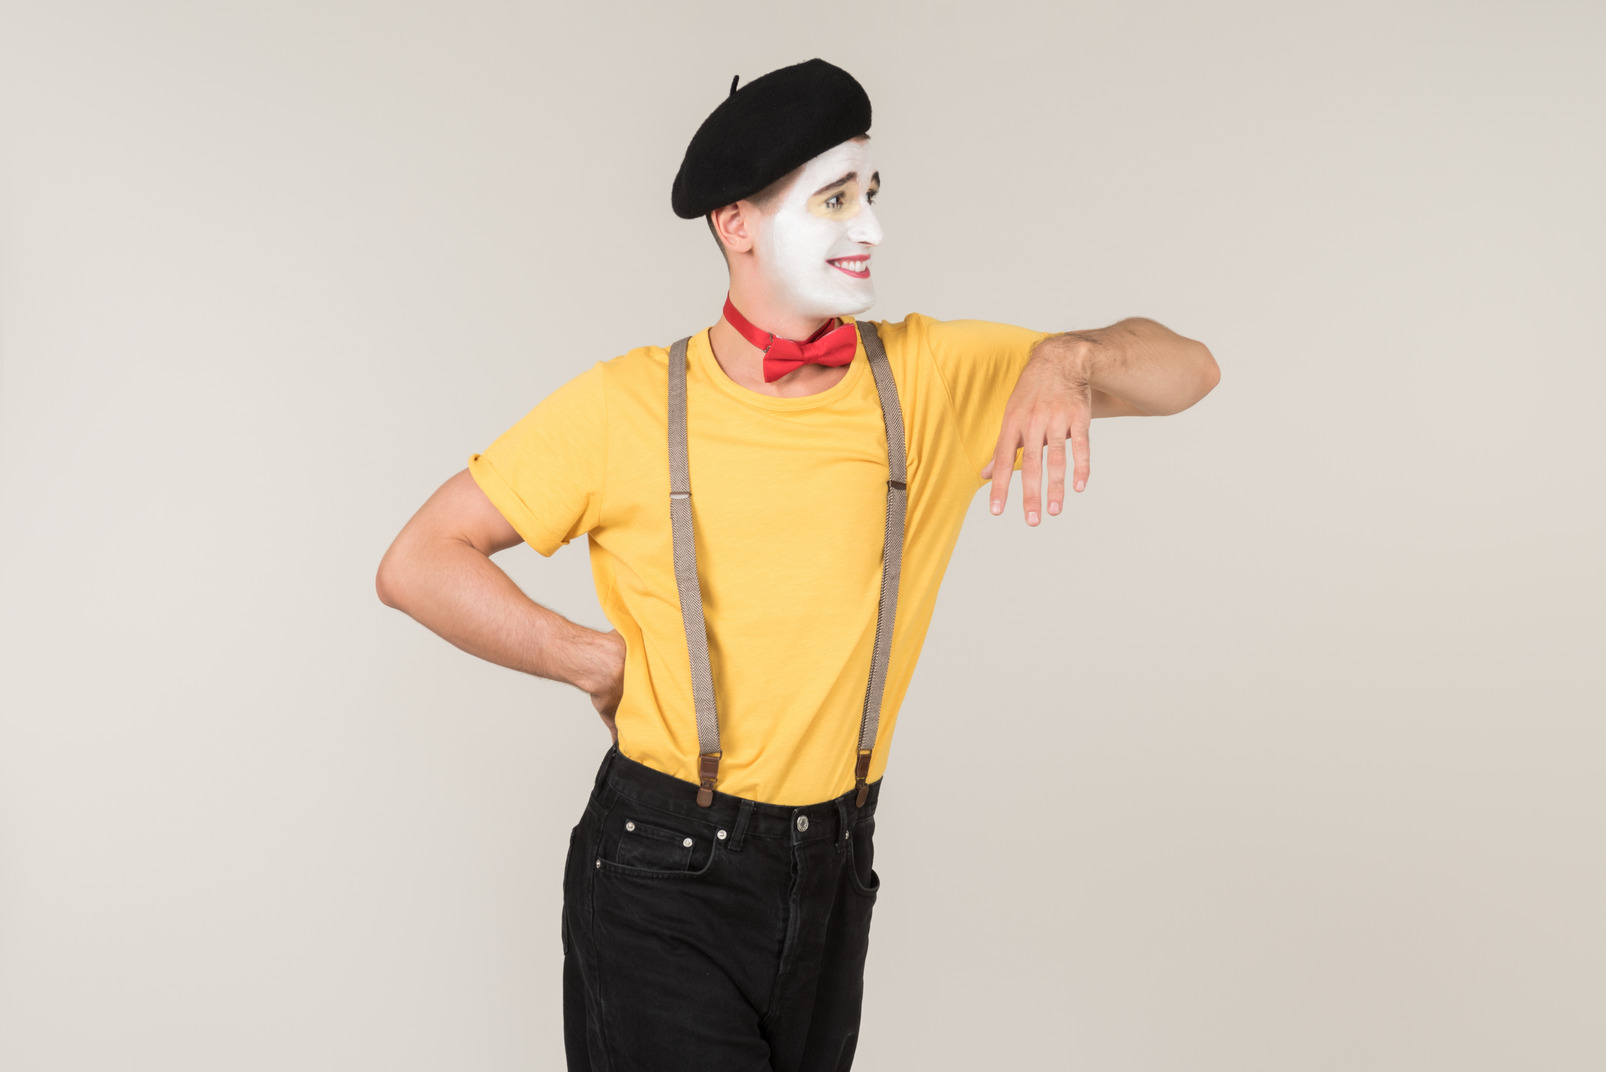 Male mime leaning on invisible object